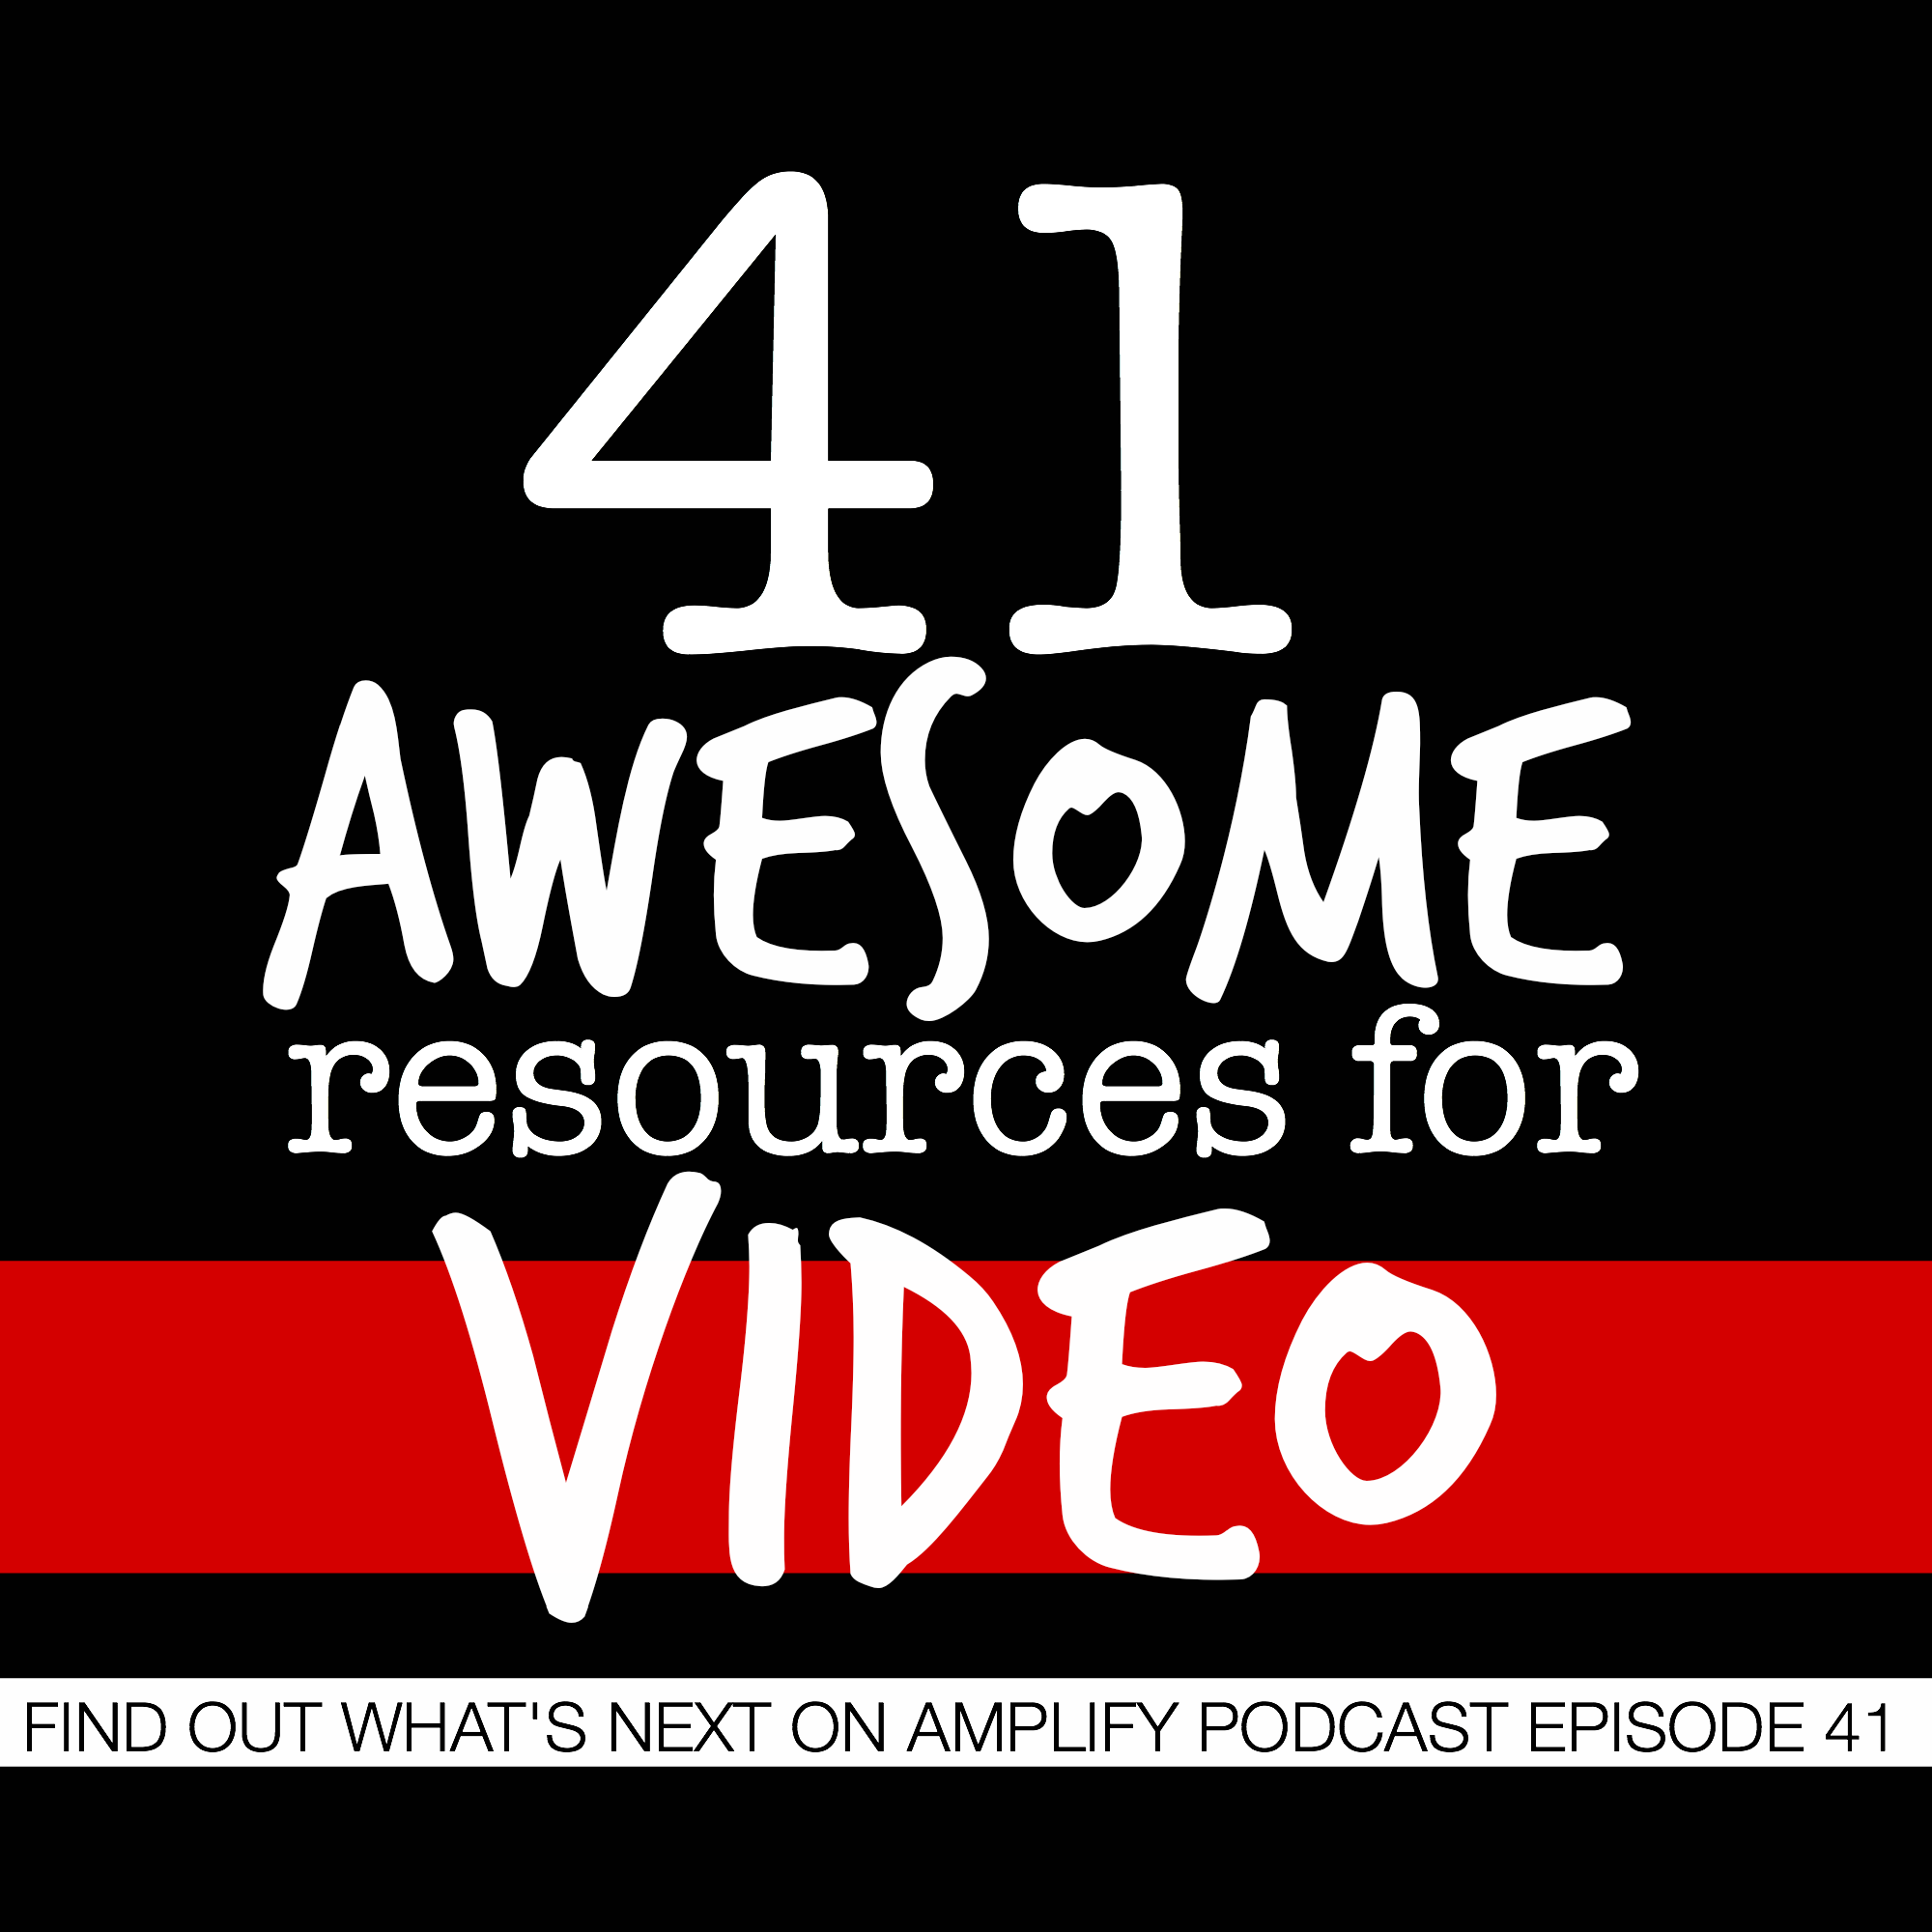 41 Awesome Resources for Video (Episode 41)